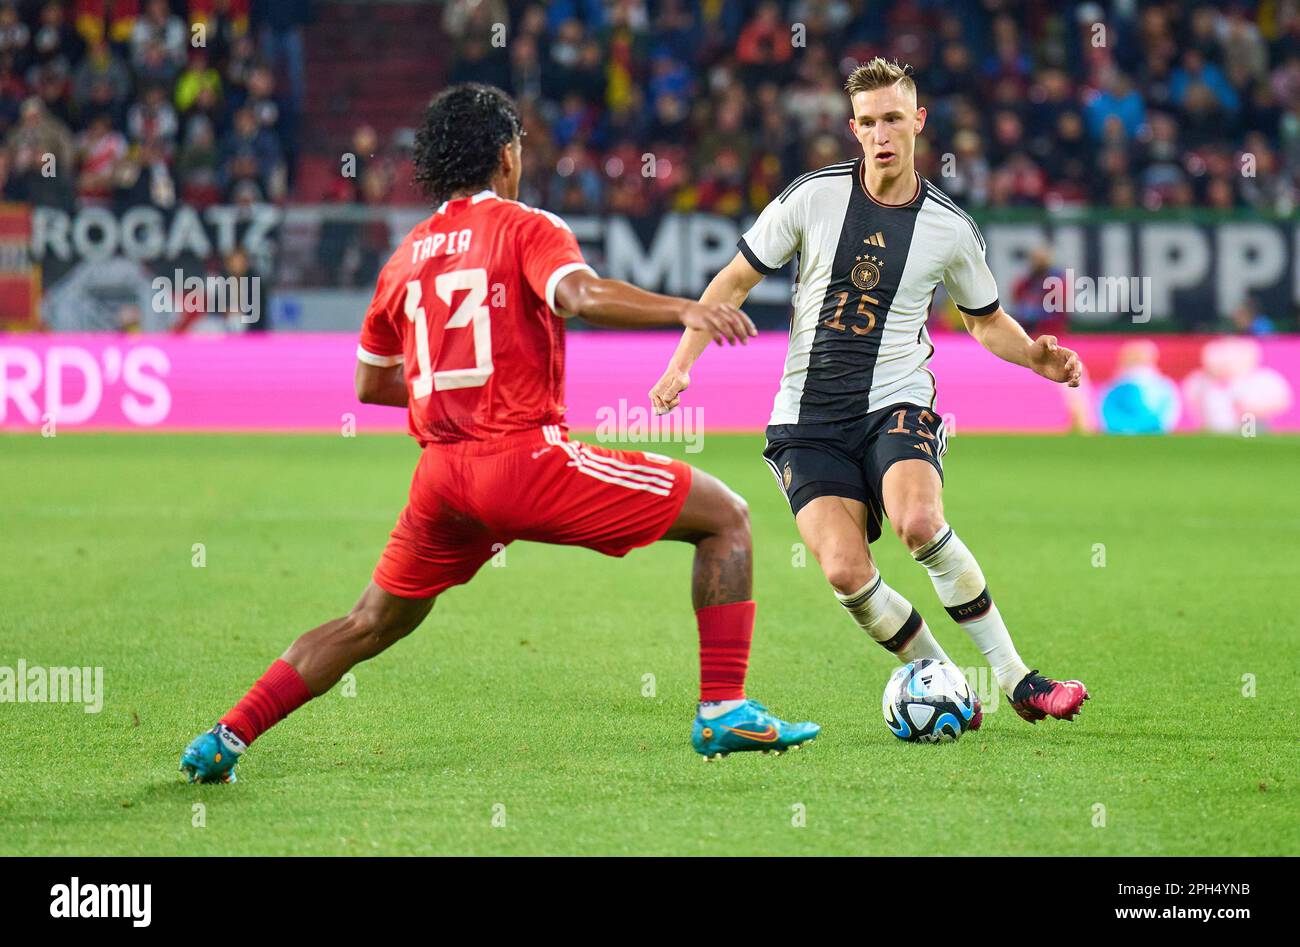 Nico Schlotterbeck, DFB 15  compete for the ball, tackling, duel, header, zweikampf, action, fight against Renato Tapia, Peru 13  in the friendly match GERMANY - PERU 2-0 Preparation for European Championships 2024 in Germany ,Season 2022/2023, on Mar 25, 2023  in Mainz, Germany.  © Peter Schatz / Alamy Live News Stock Photo